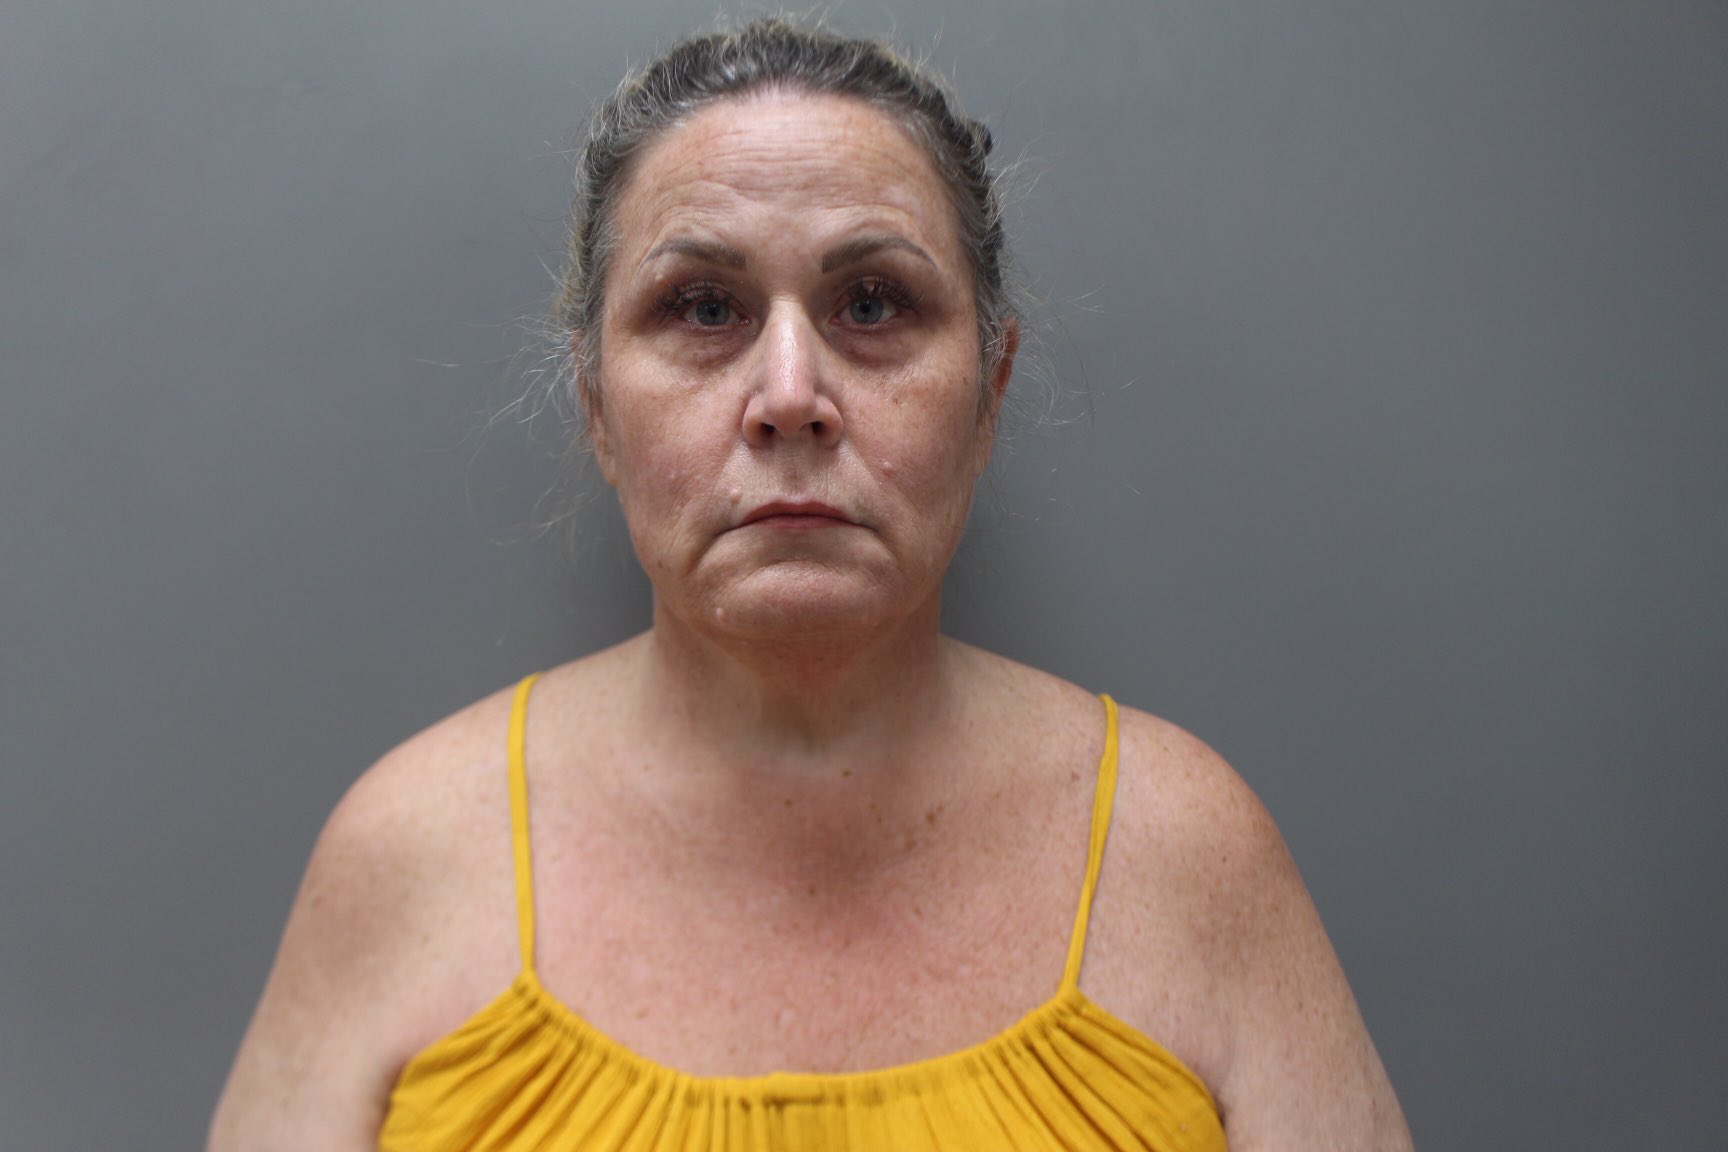 Texas Woman Charged With Grand Larceny After Stolen Jewelry Recovered: VIPD